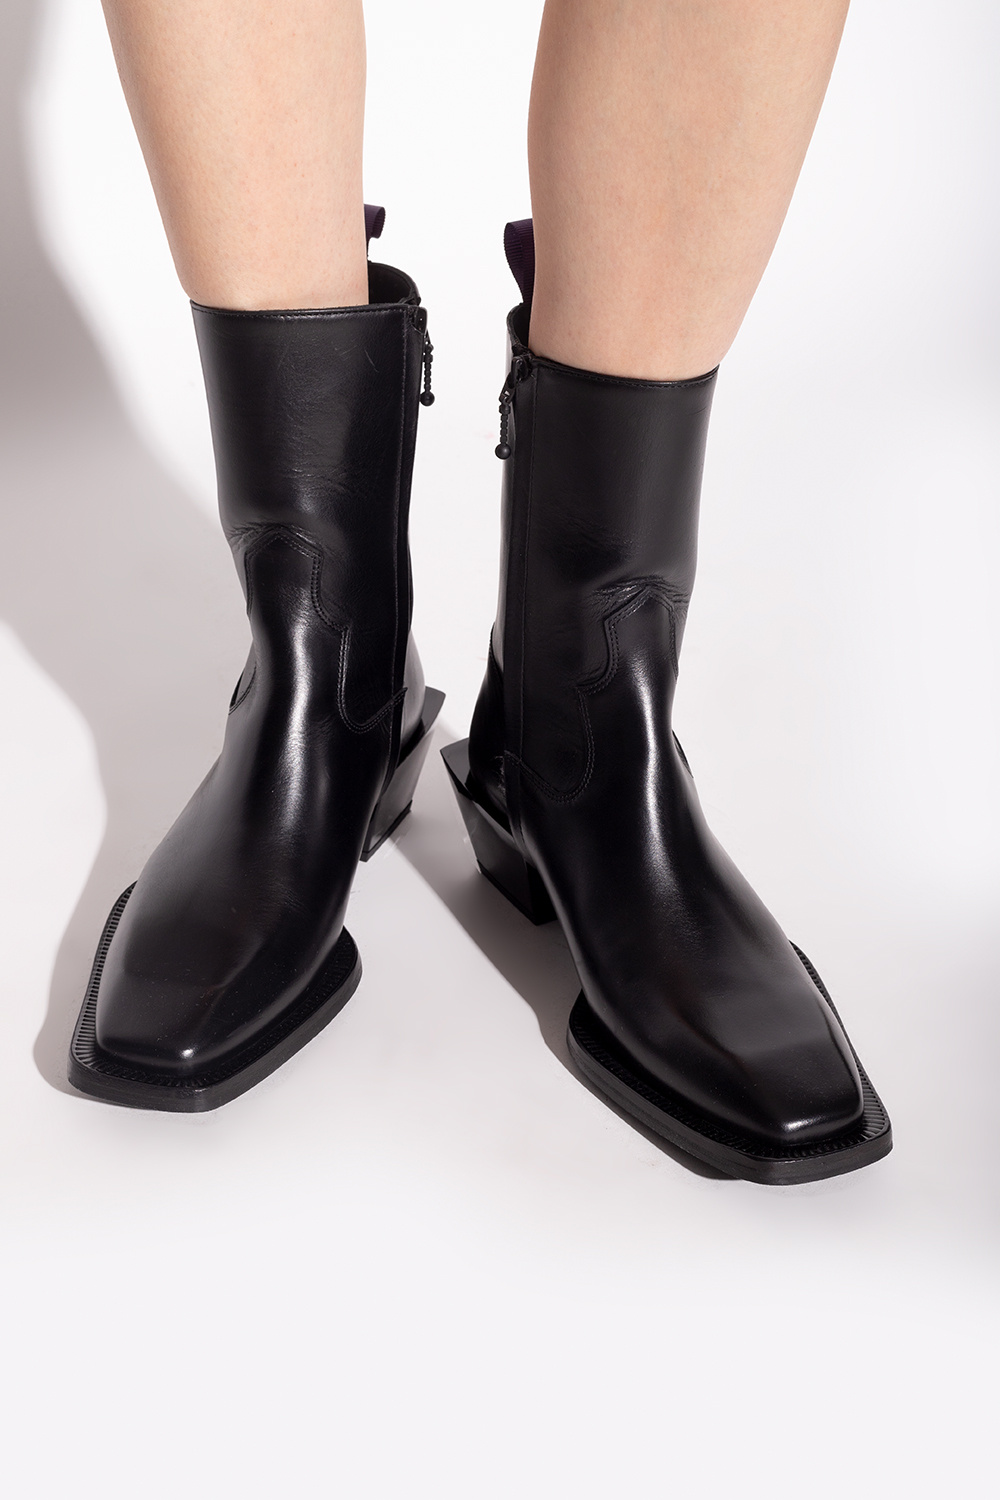 Black 'Luciano' heeled ankle boots Eytys - Vitkac Canada